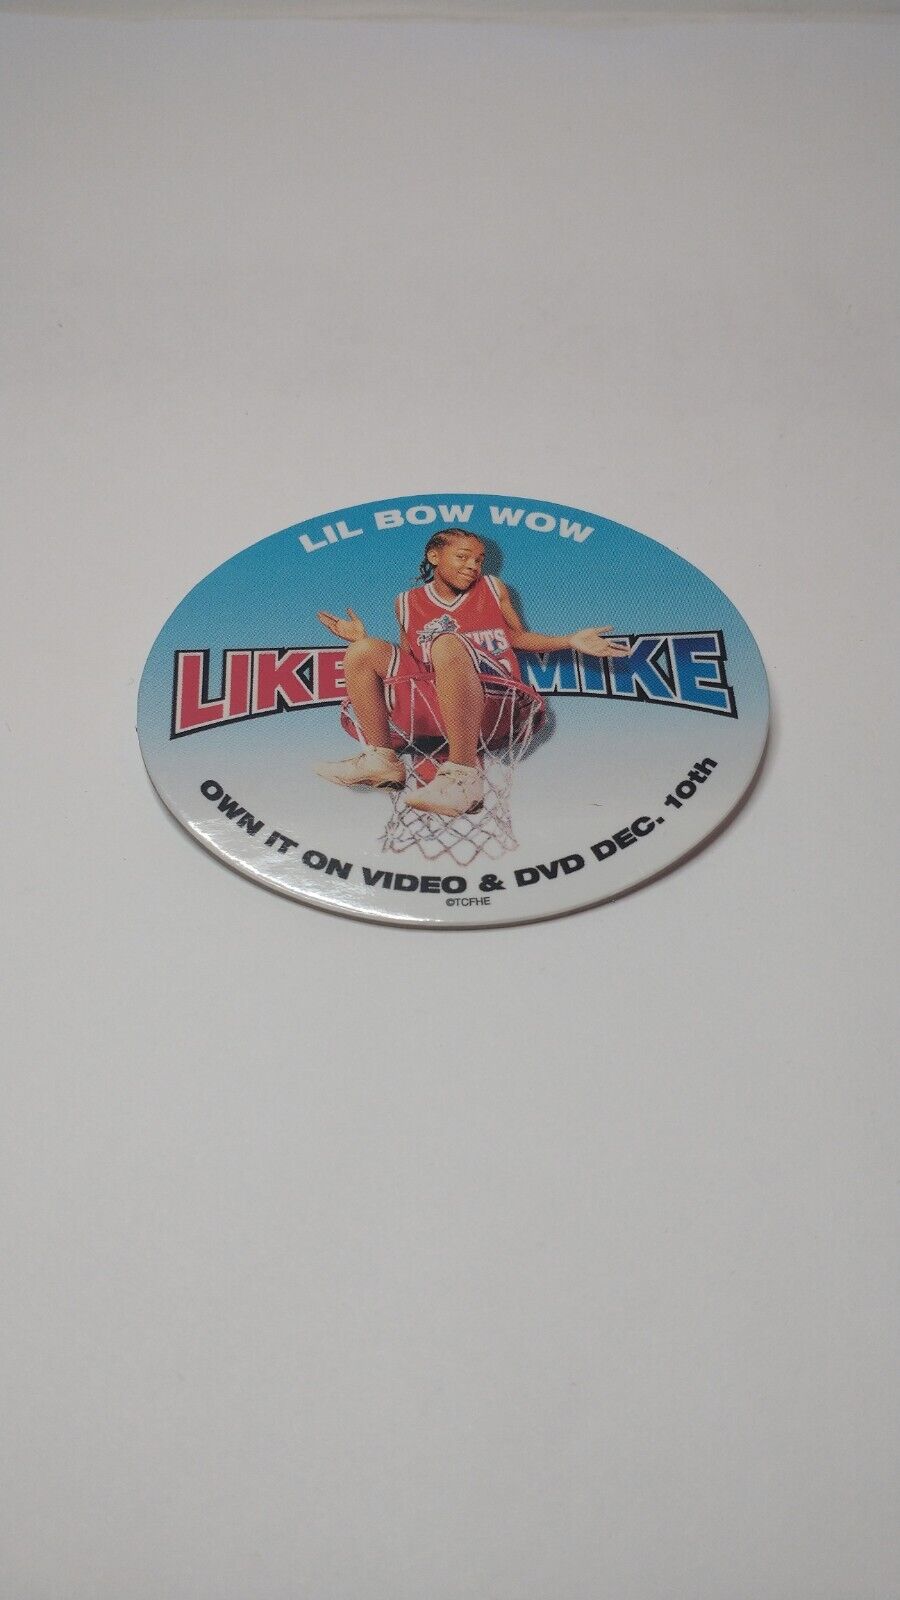 Lil Bow Wow Like Mike Movie Promo Pin Pinback Advertising